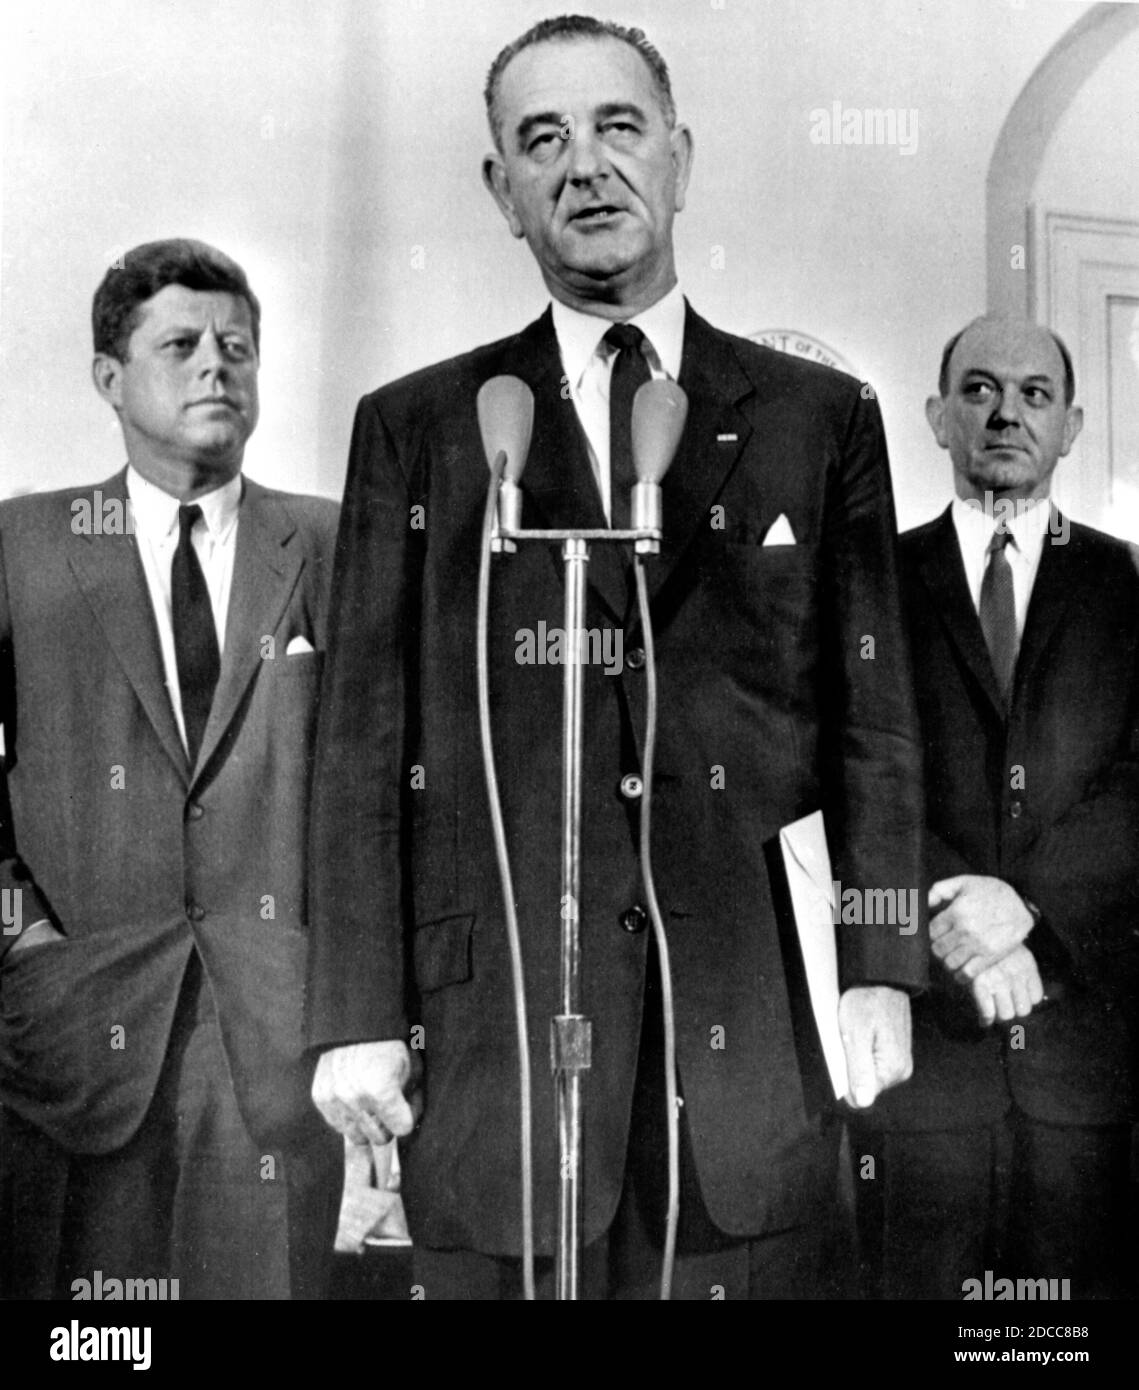 Flanked by American President John F Kennedy and Secretary of State Dean Rusk, US Vice President Lyndon B Johnson reports to the press following his weekend visit to Berlin in August 1961, at the height of the Berlin Crisis and the creation of the Berlin Wall. Stock Photo